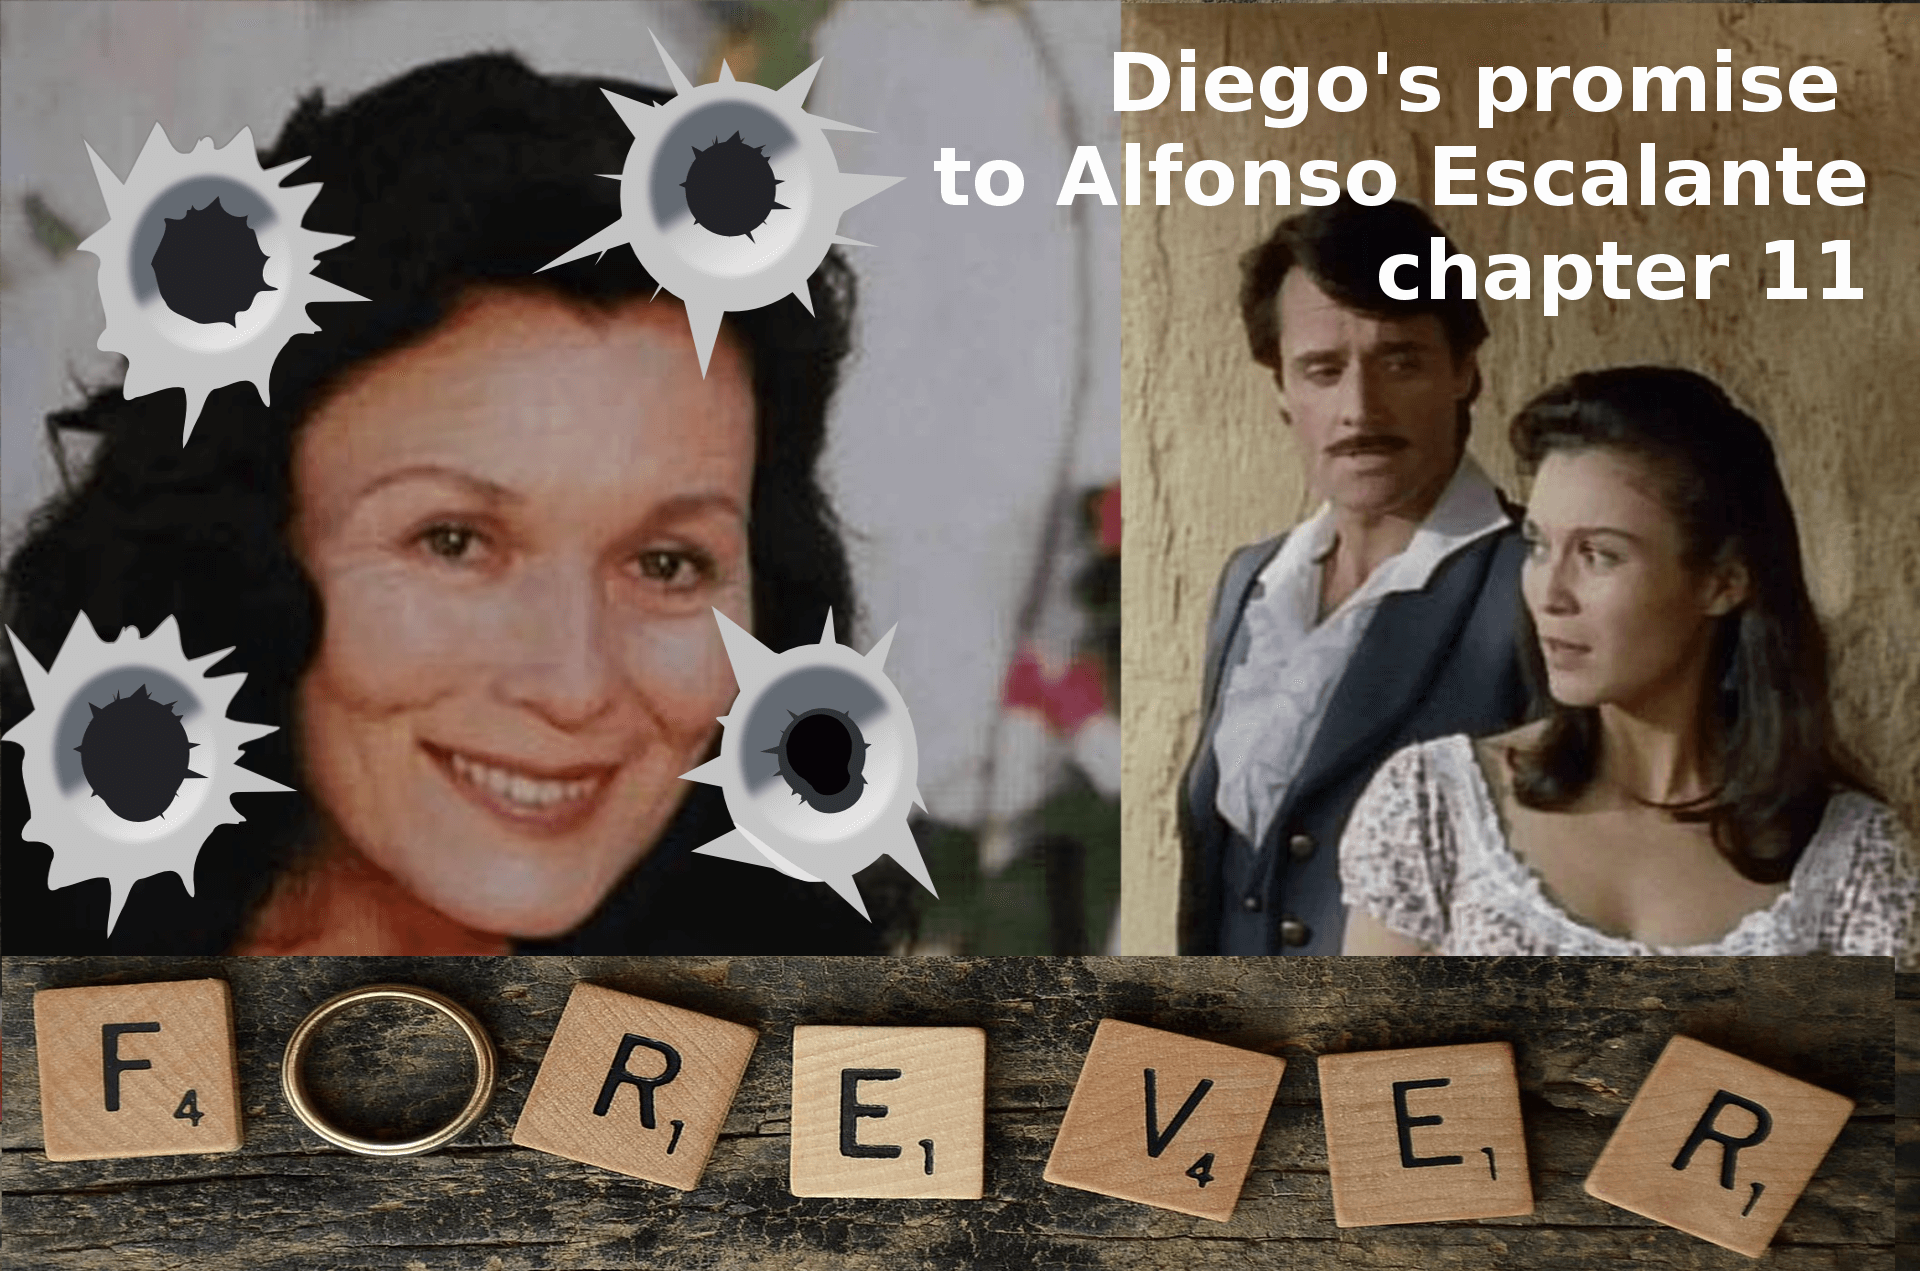 Diego's promise to Alfonso Escalante – chapter 11 Zorro fanfiction